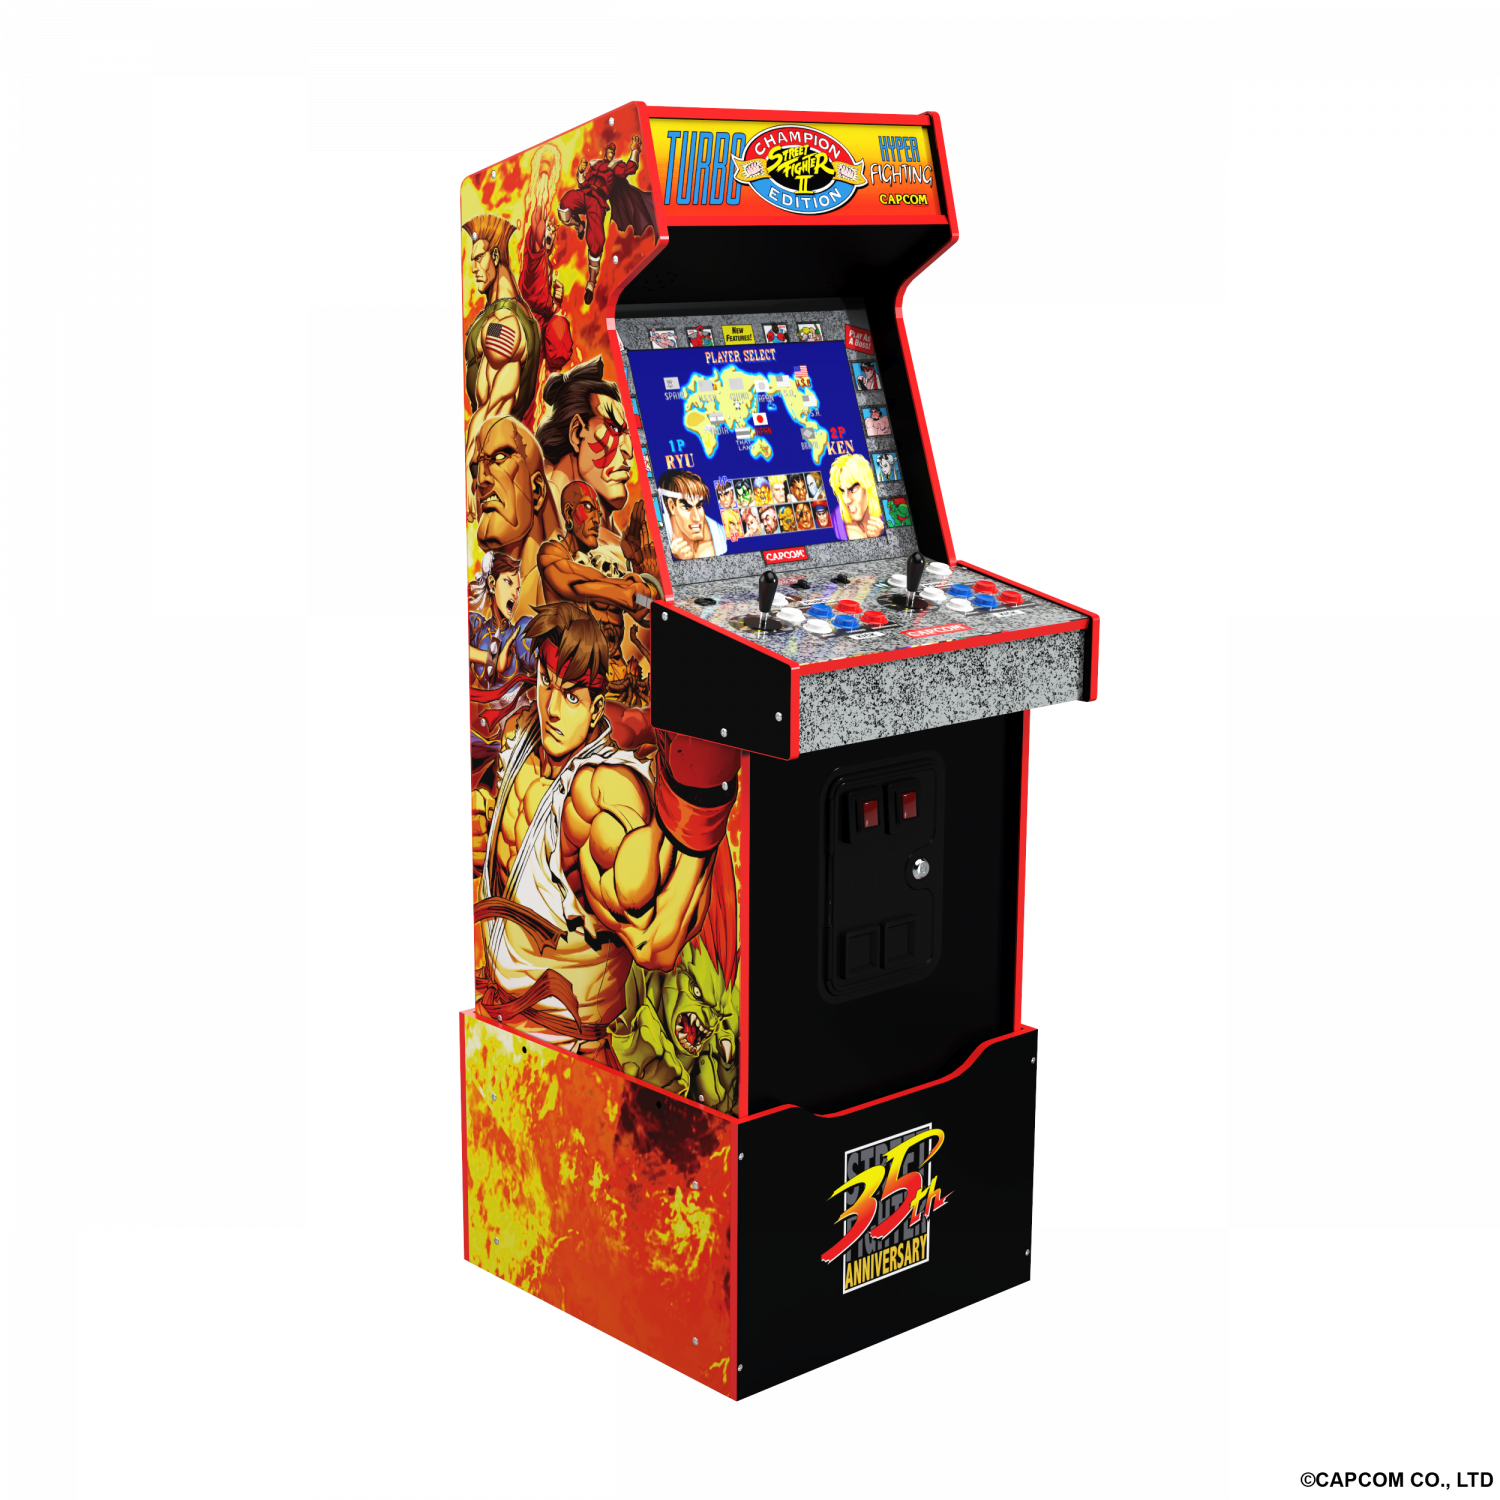 ARCADE 1 UP STREET FIGHTER LEGACY 14-IN-1 WIFI ENABLED ARCADE MACHINE